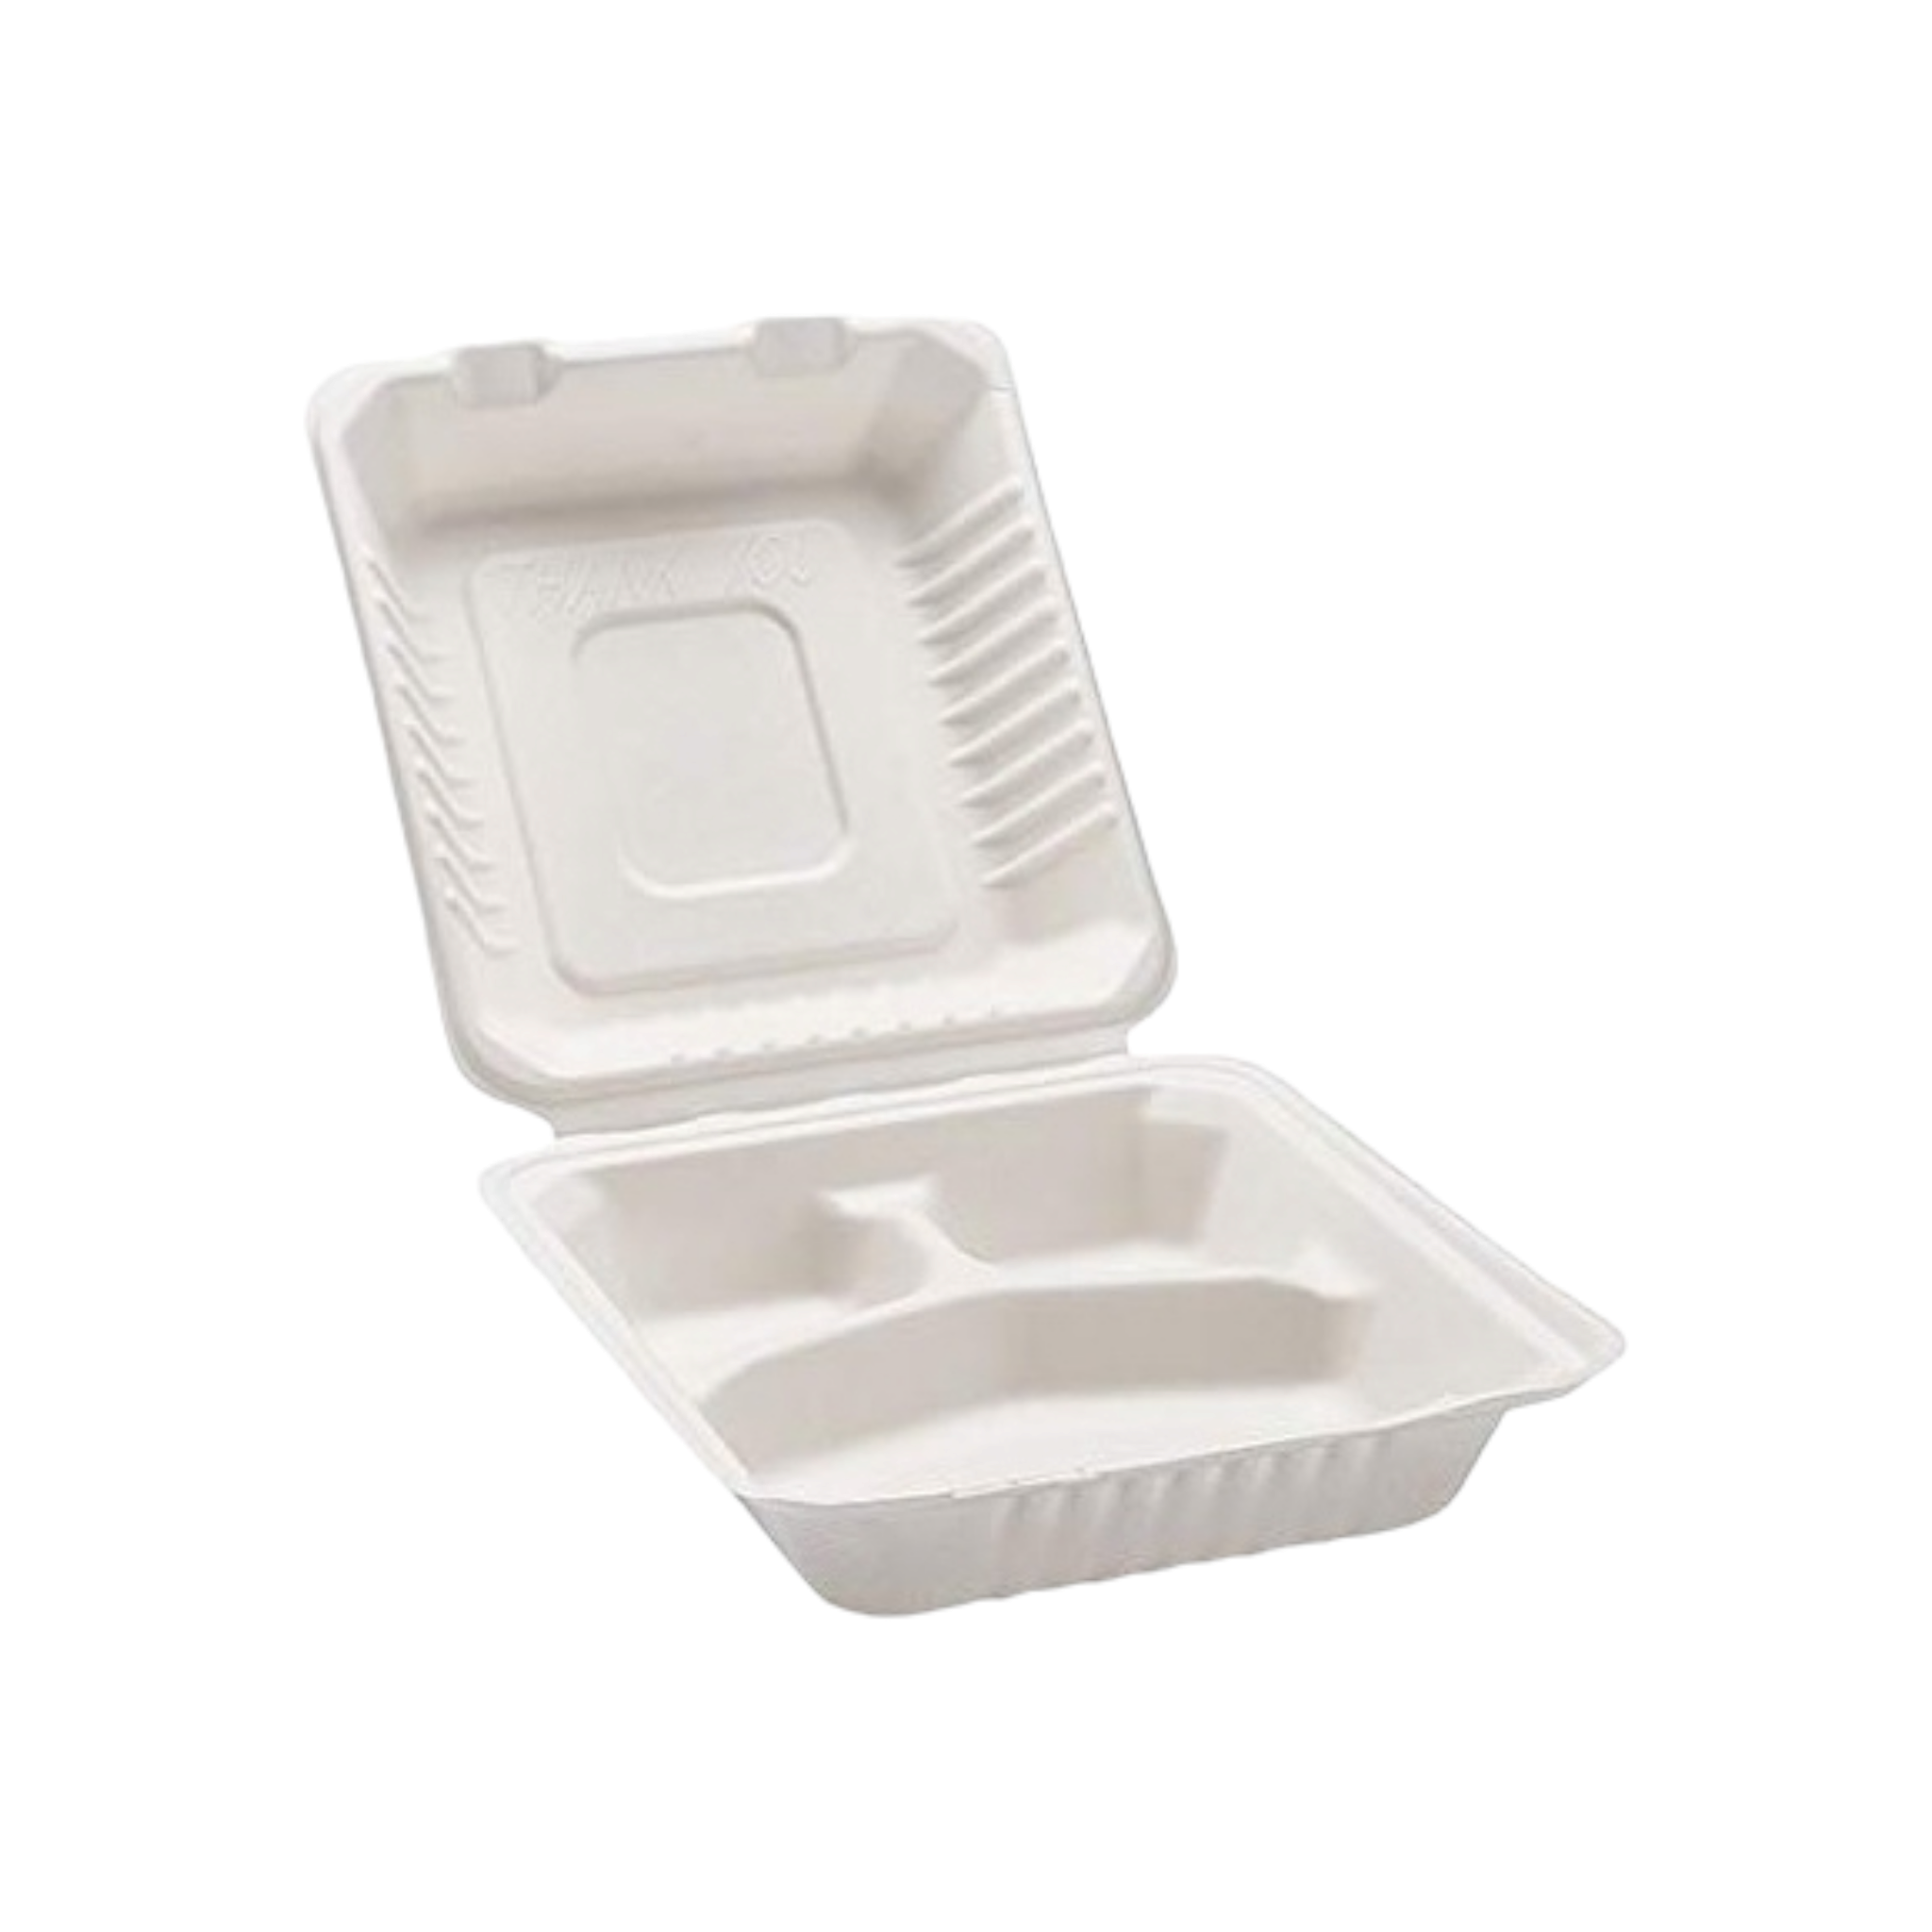 Bio Lunchbox 3 Compartment 8inch Takeaway Clamshell Sugar Cane